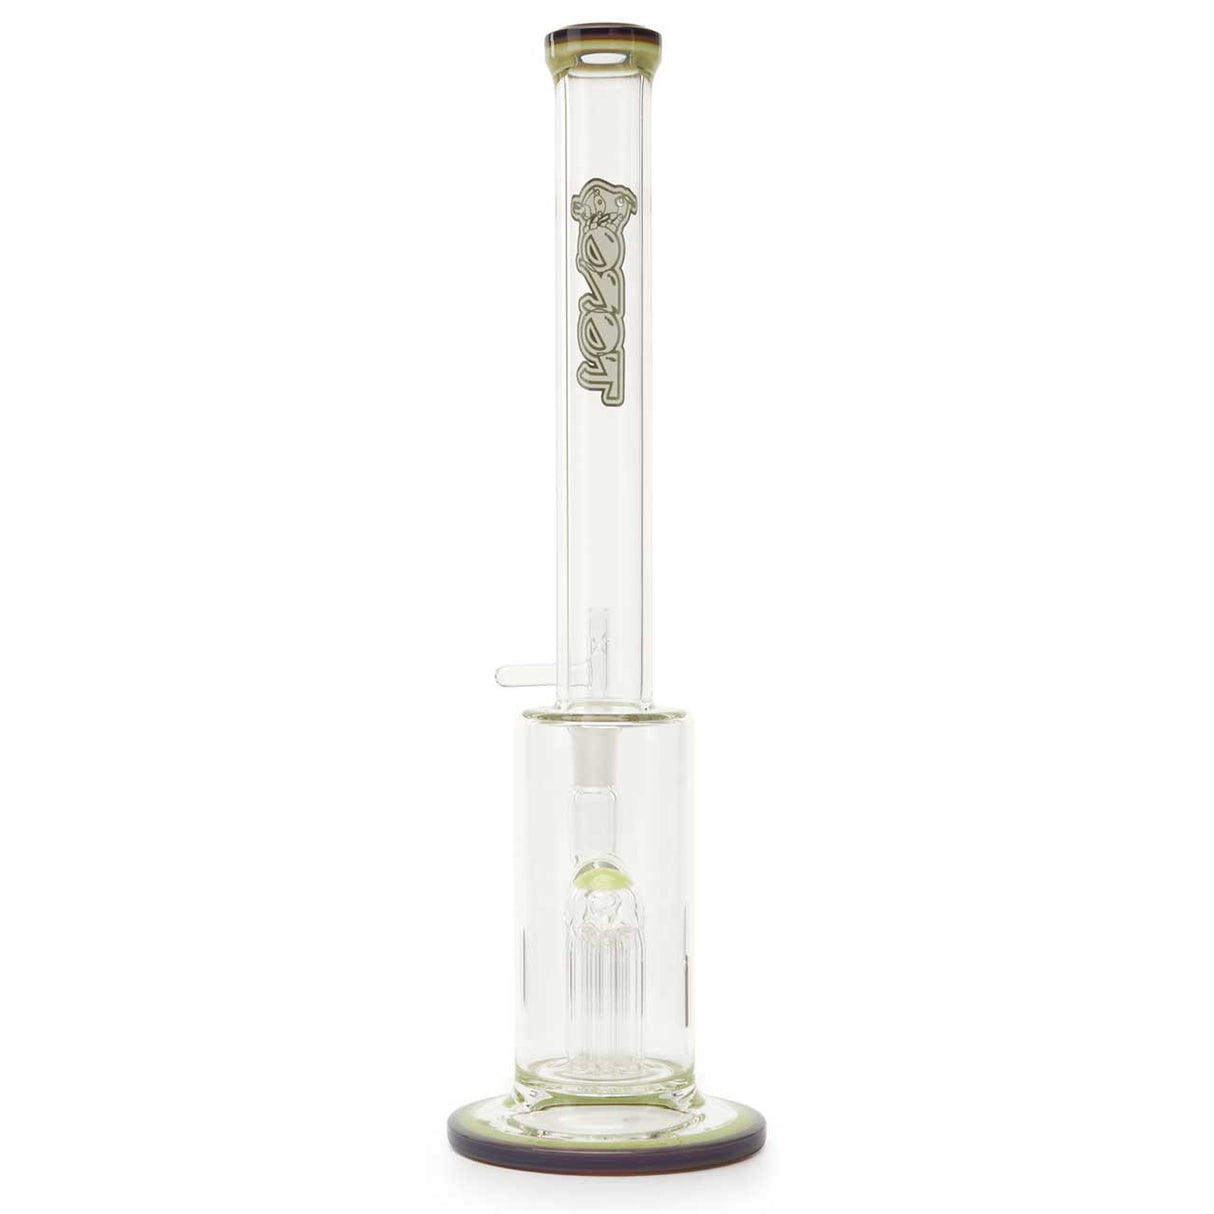 Toro Glass Premium Scientific Glass Water Pipe for Sale Tall 6 Arm Perc with Blue, Purple, Slime worked glass on lip and foot